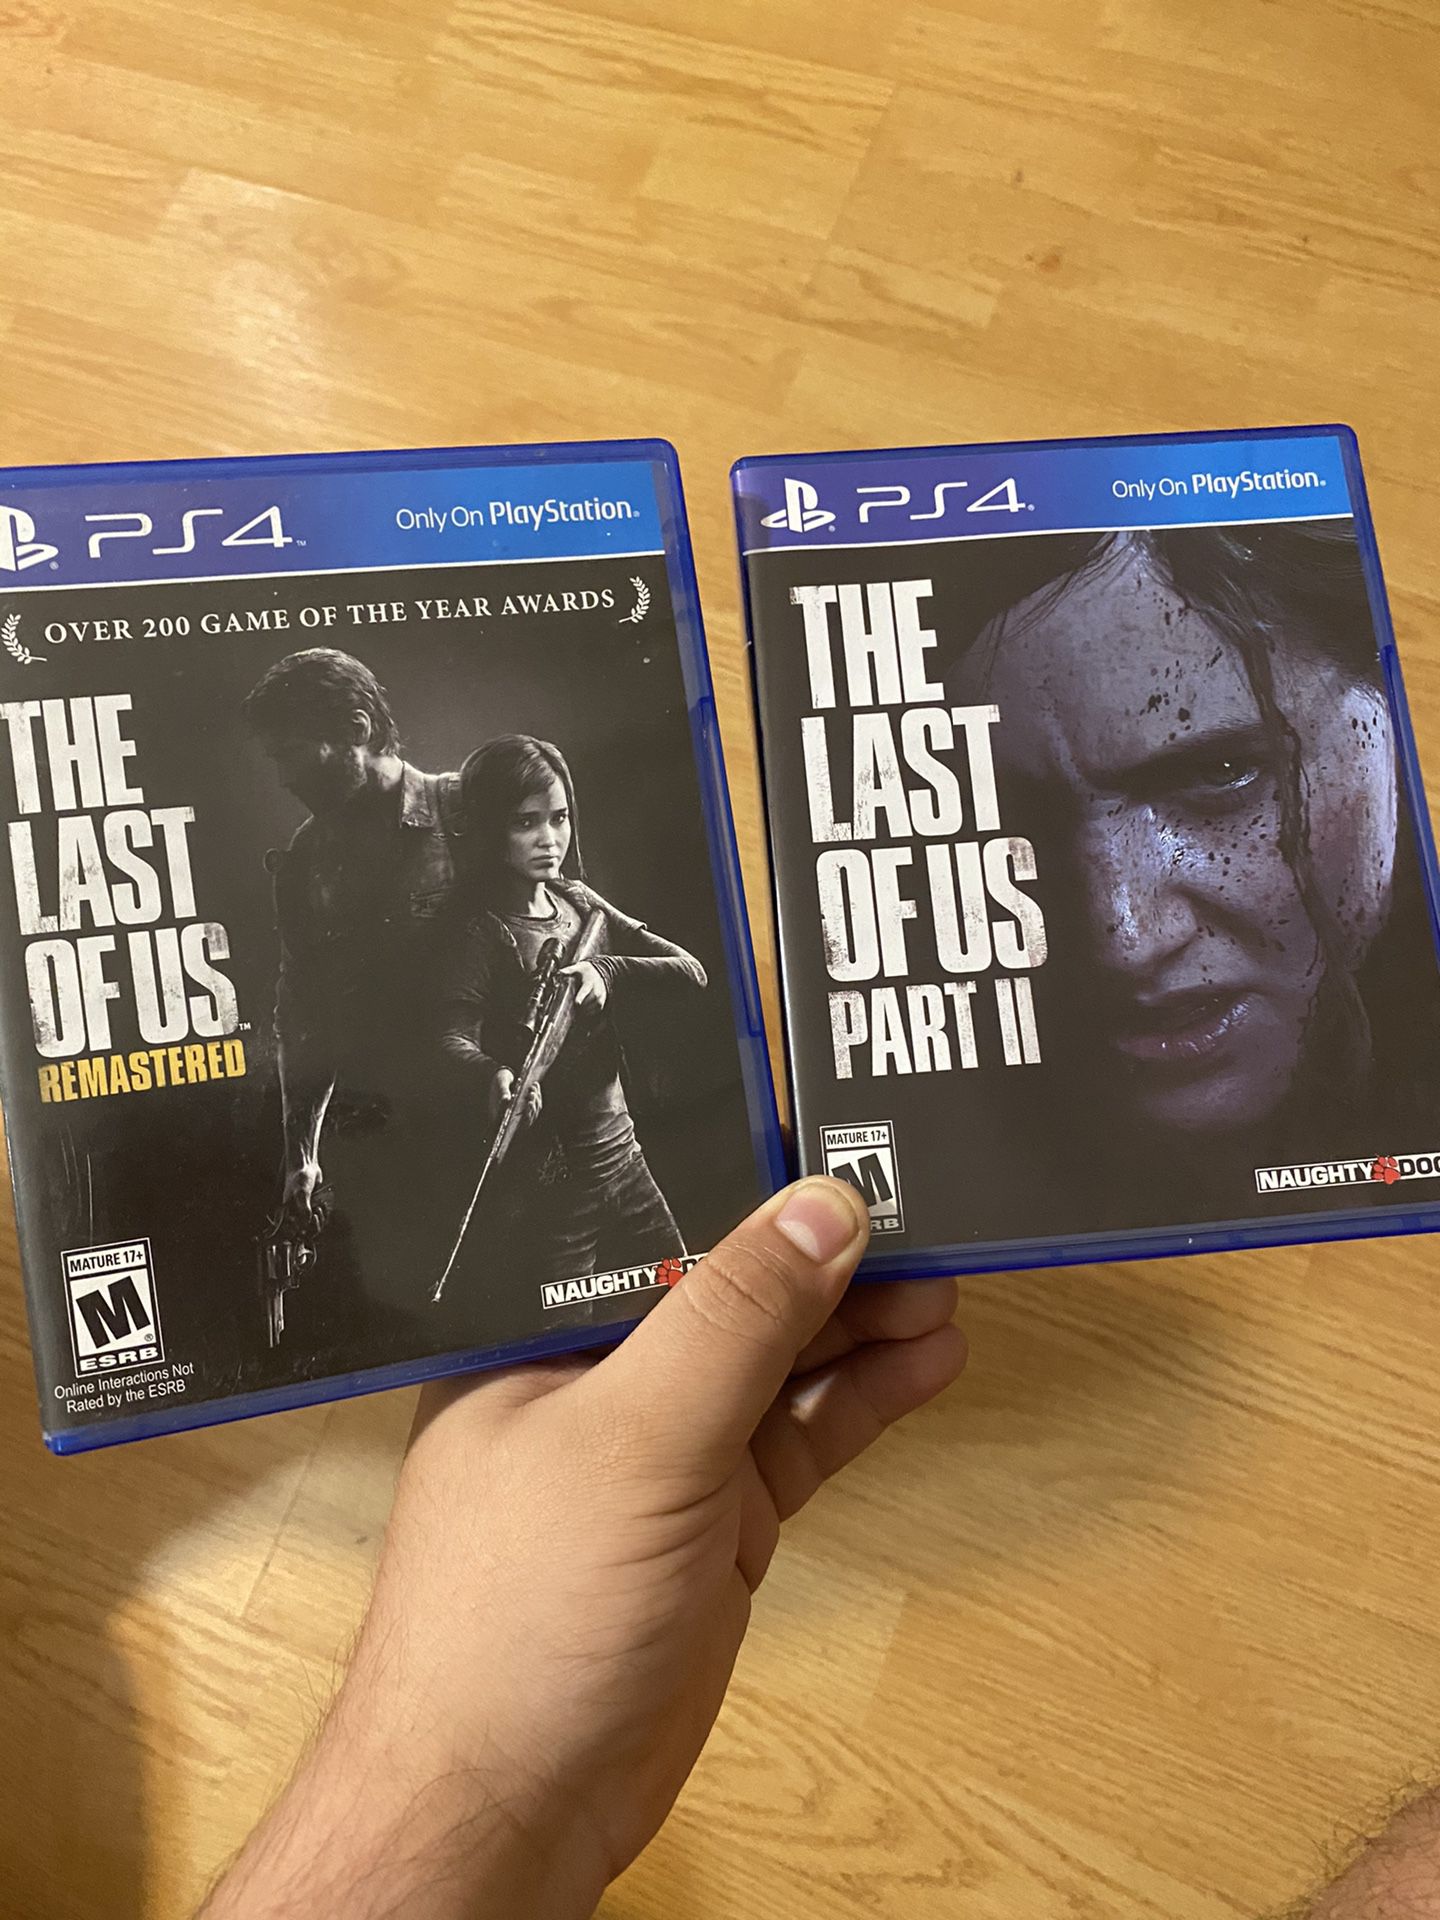 Last of us games PS4